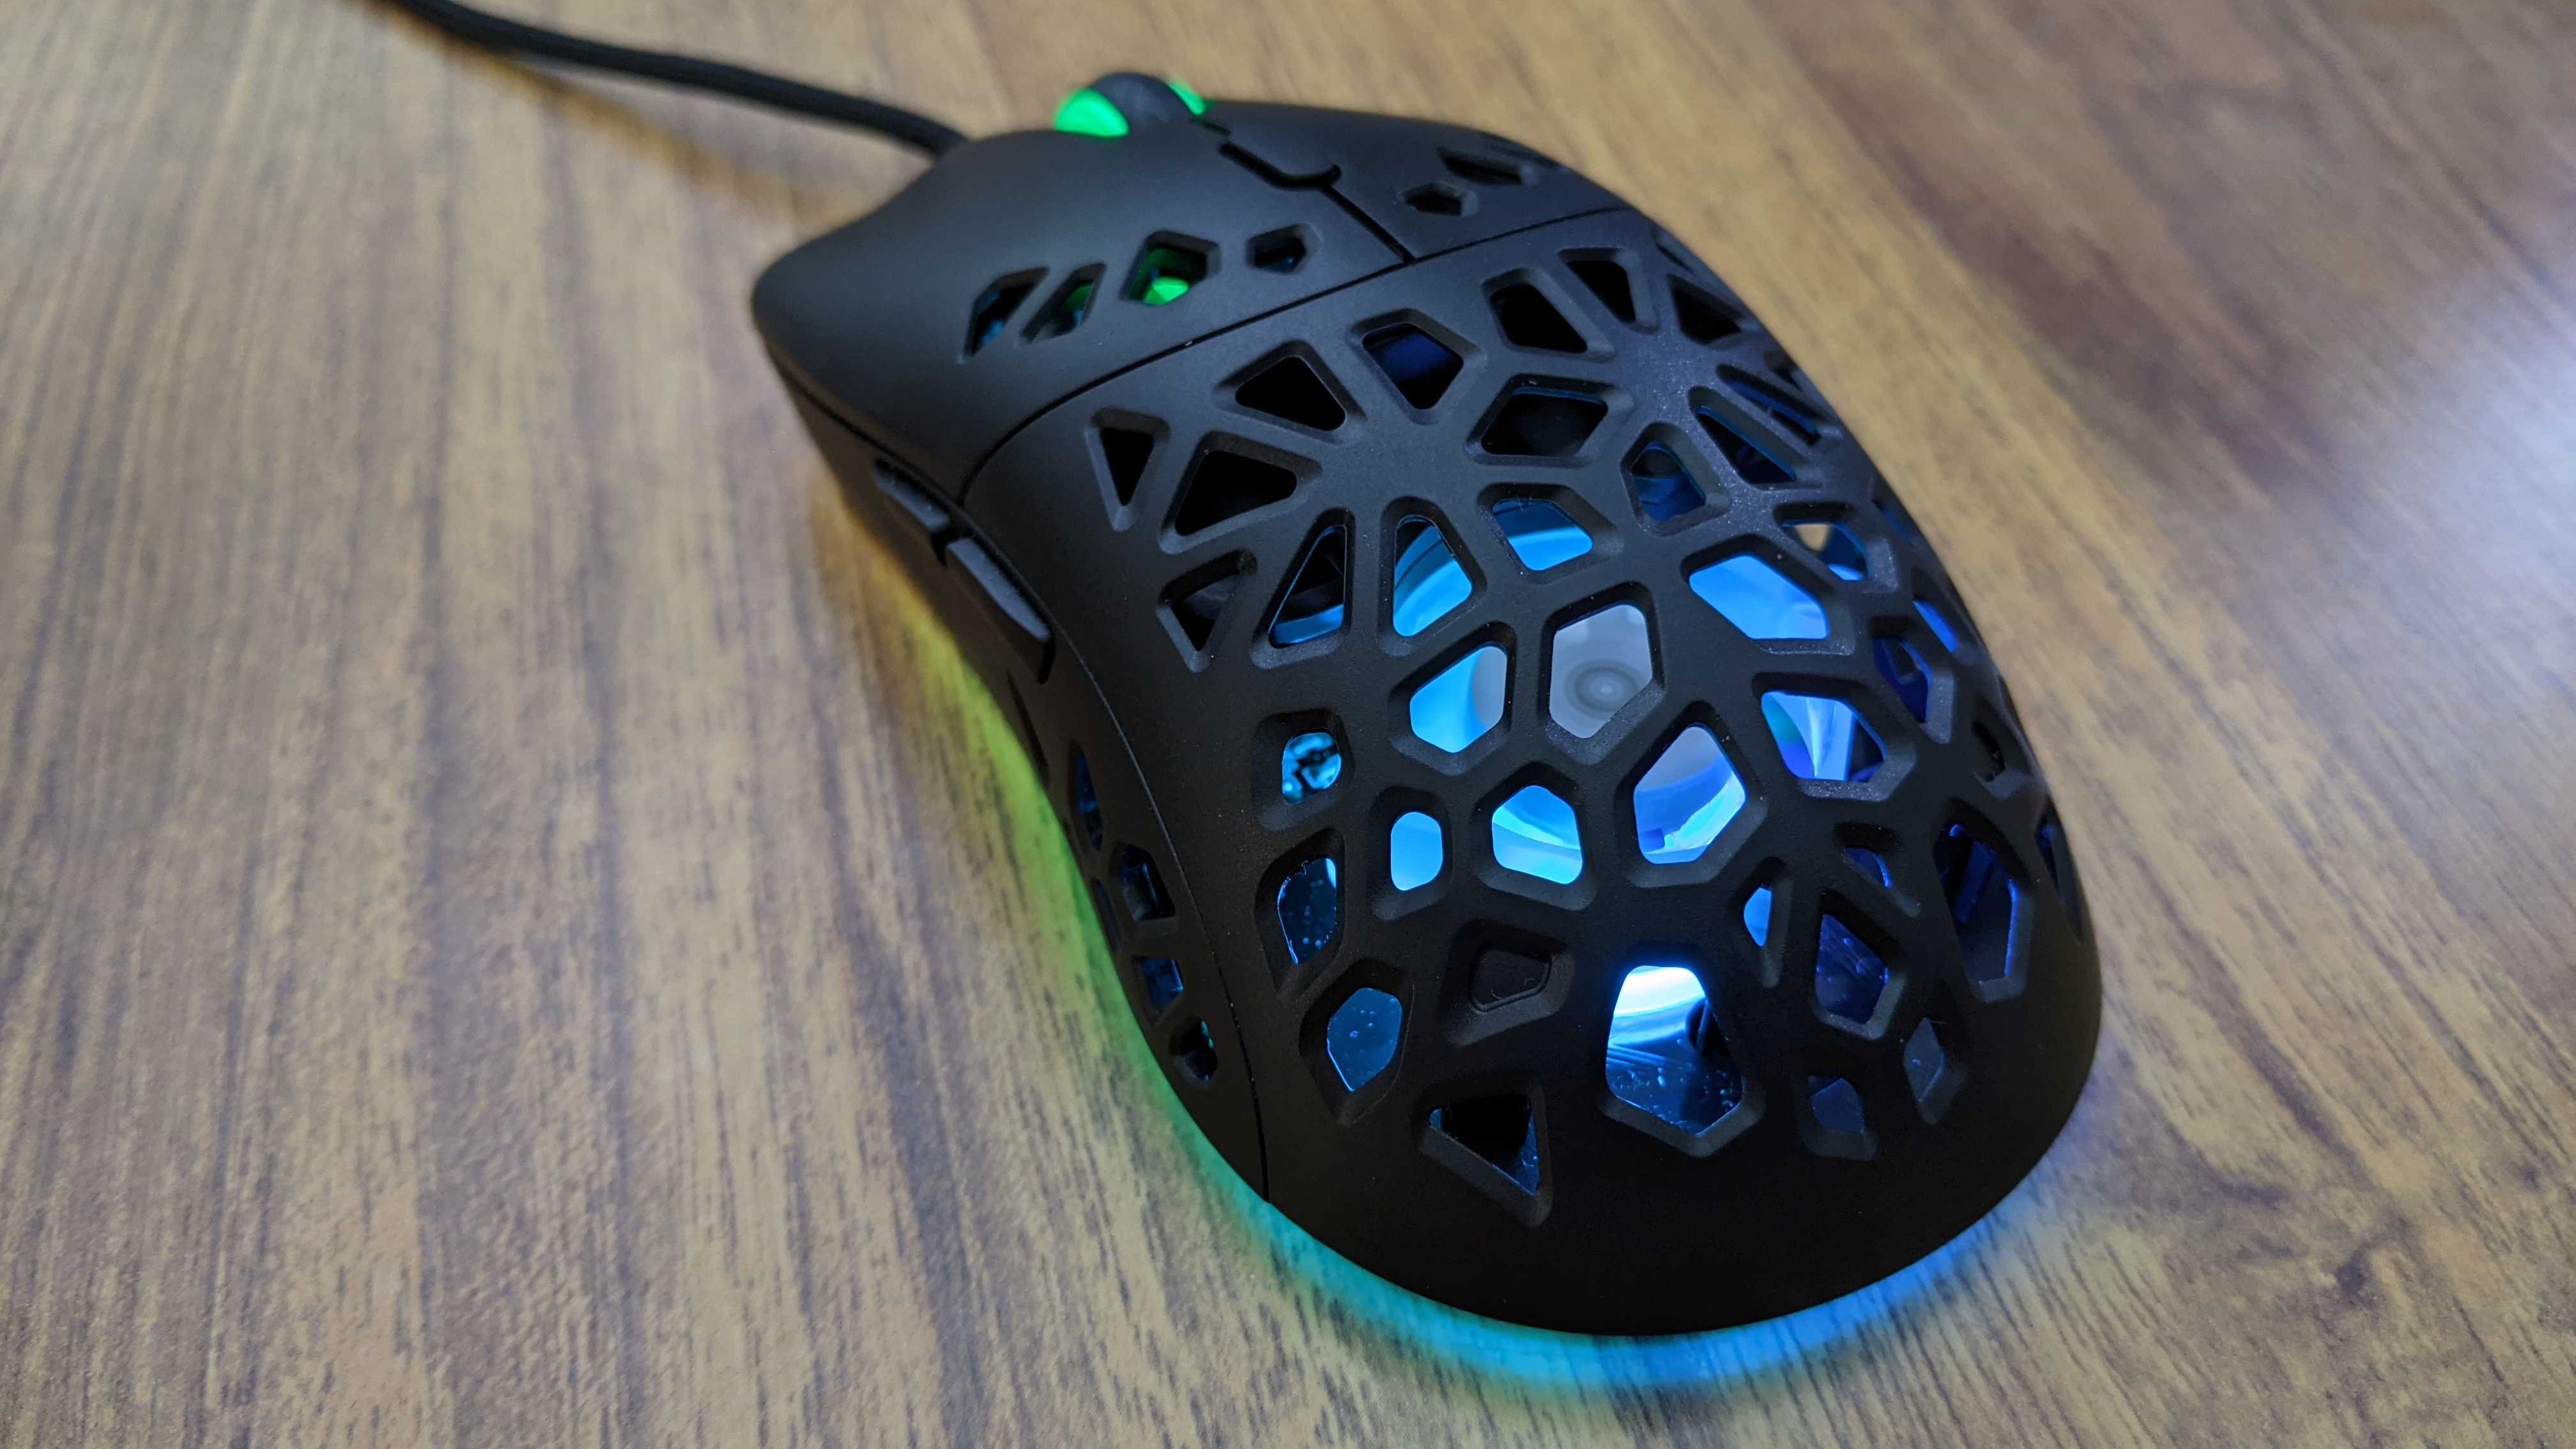 The Marsback Zephyr Pro gaming mouse seen from the back - its fractal design is lit up by the fan